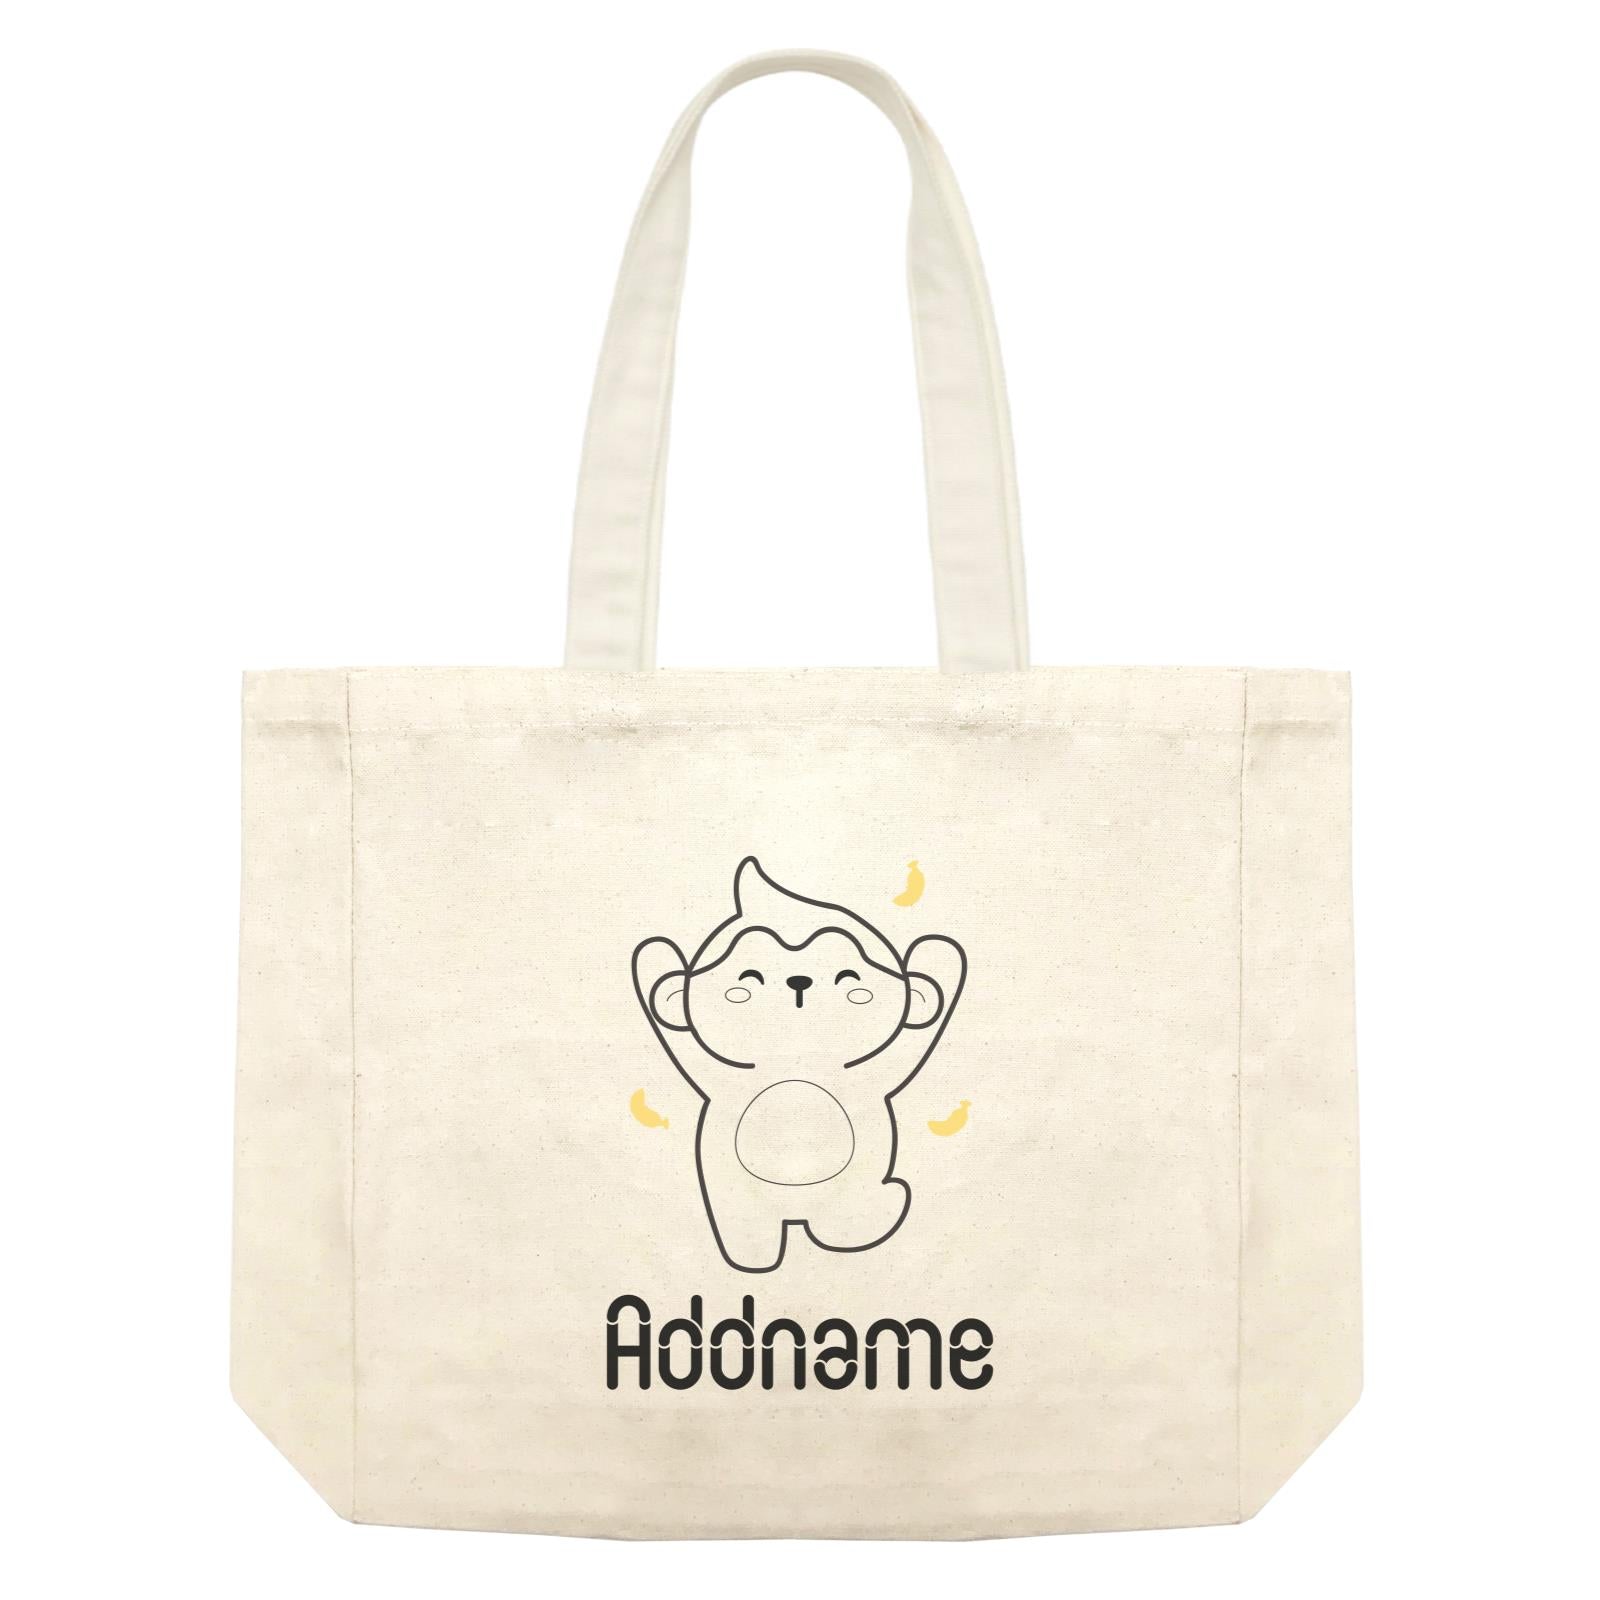 Coloring Outline Cute Hand Drawn Animals Furry Cheerful Monkey Addname Shopping Bag